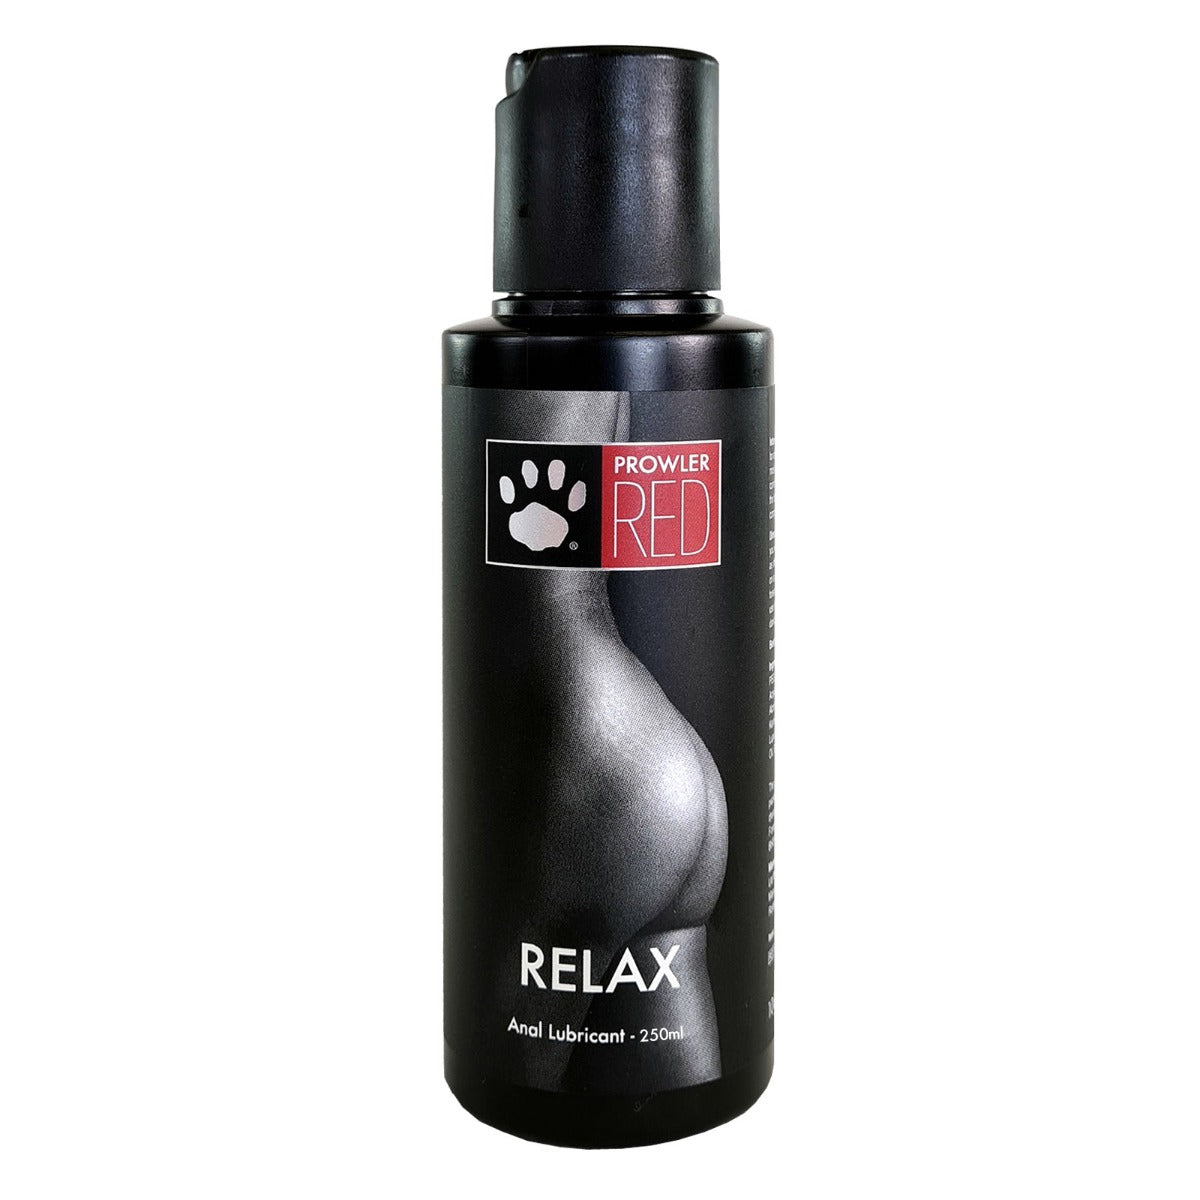 PROWLER RED Relax, 250ml